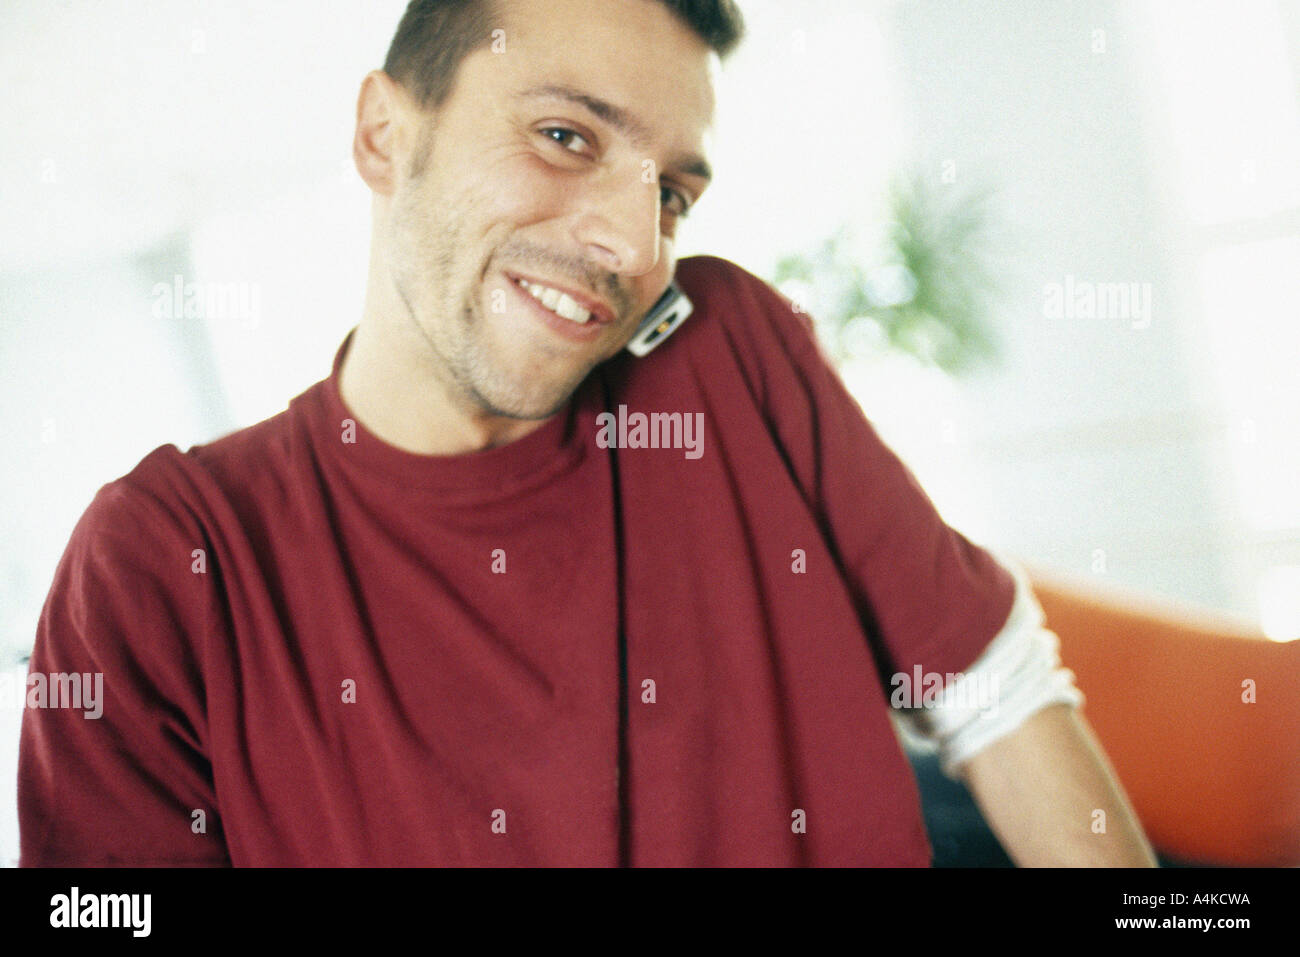 Man using cell phone Stock Photo